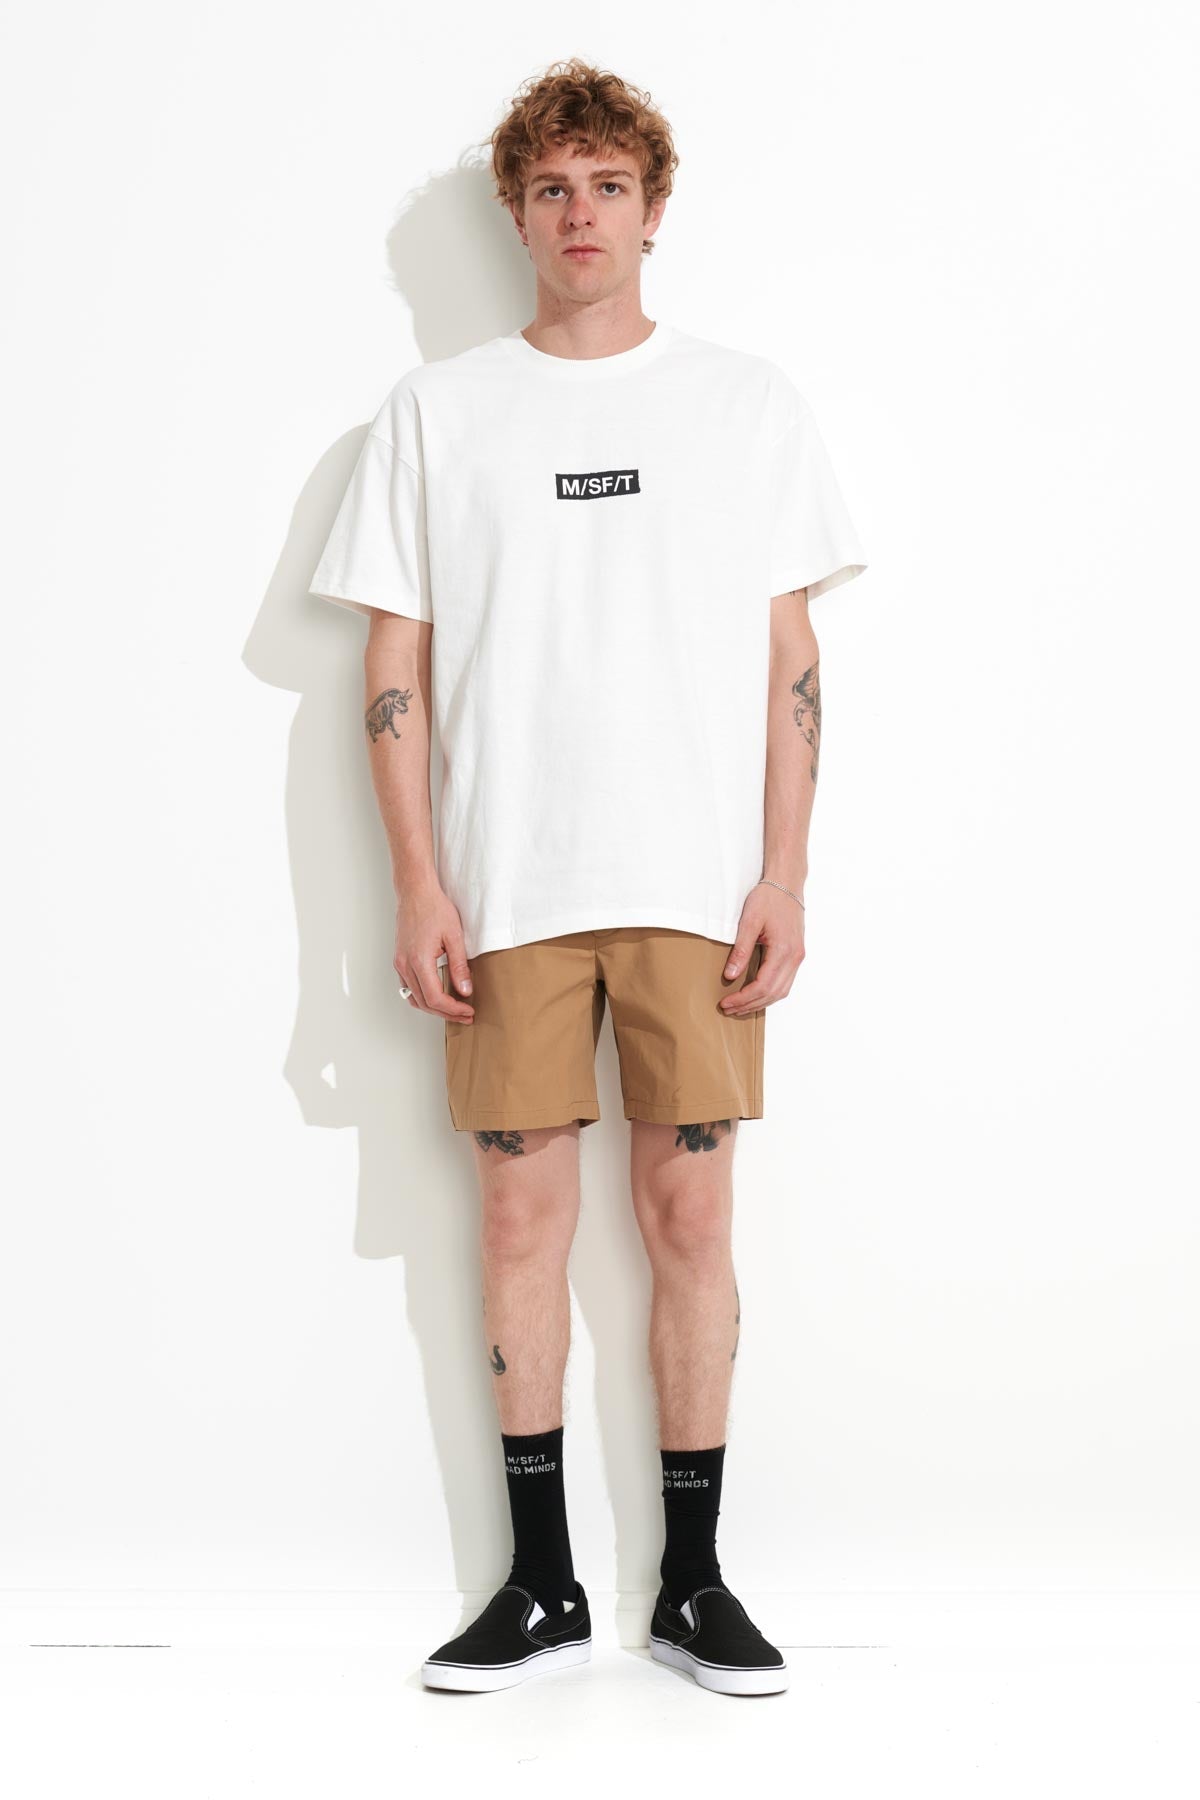 Misfit Shapes - Dribble 50-50 Aaa SS Tee - Washed White